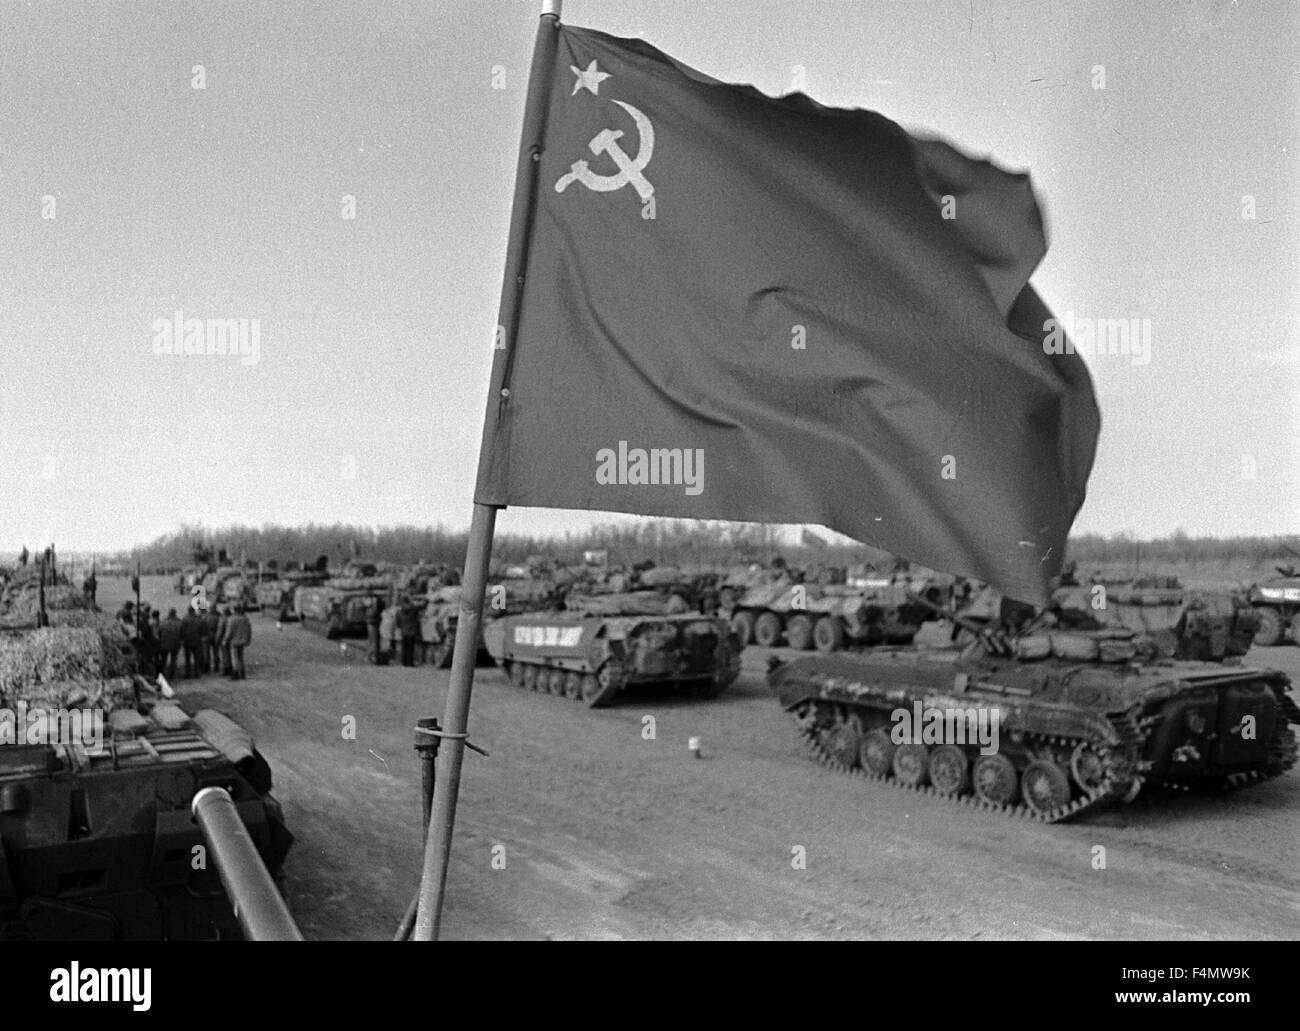 Soviet Afghanistan war - Page 6 Ussr-termez-withdrawal-of-soviet-forces-from-afghanistan-soldiers-F4MW9K